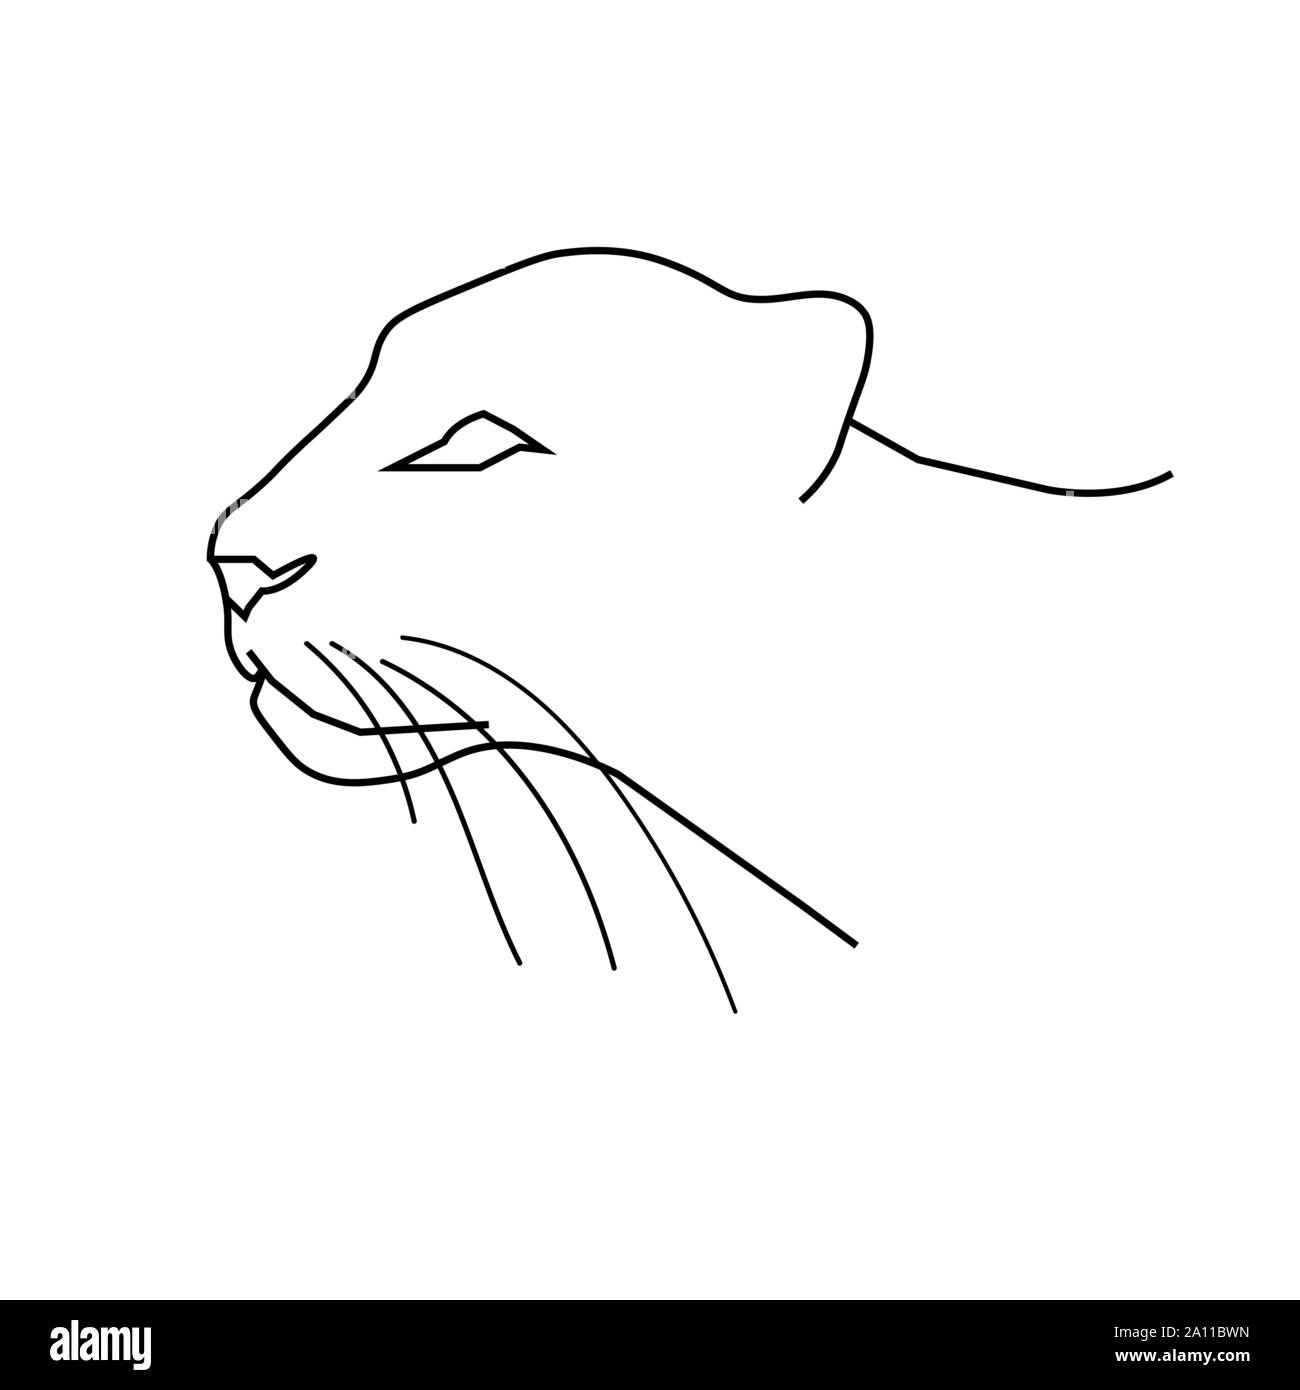 Panther or leopard's head. Line art doodle sketch. Black outline on white background. Background can be used in greeting cards, posters, flyers, banners, logos etc. Vector illustration. EPS10 Stock Vector